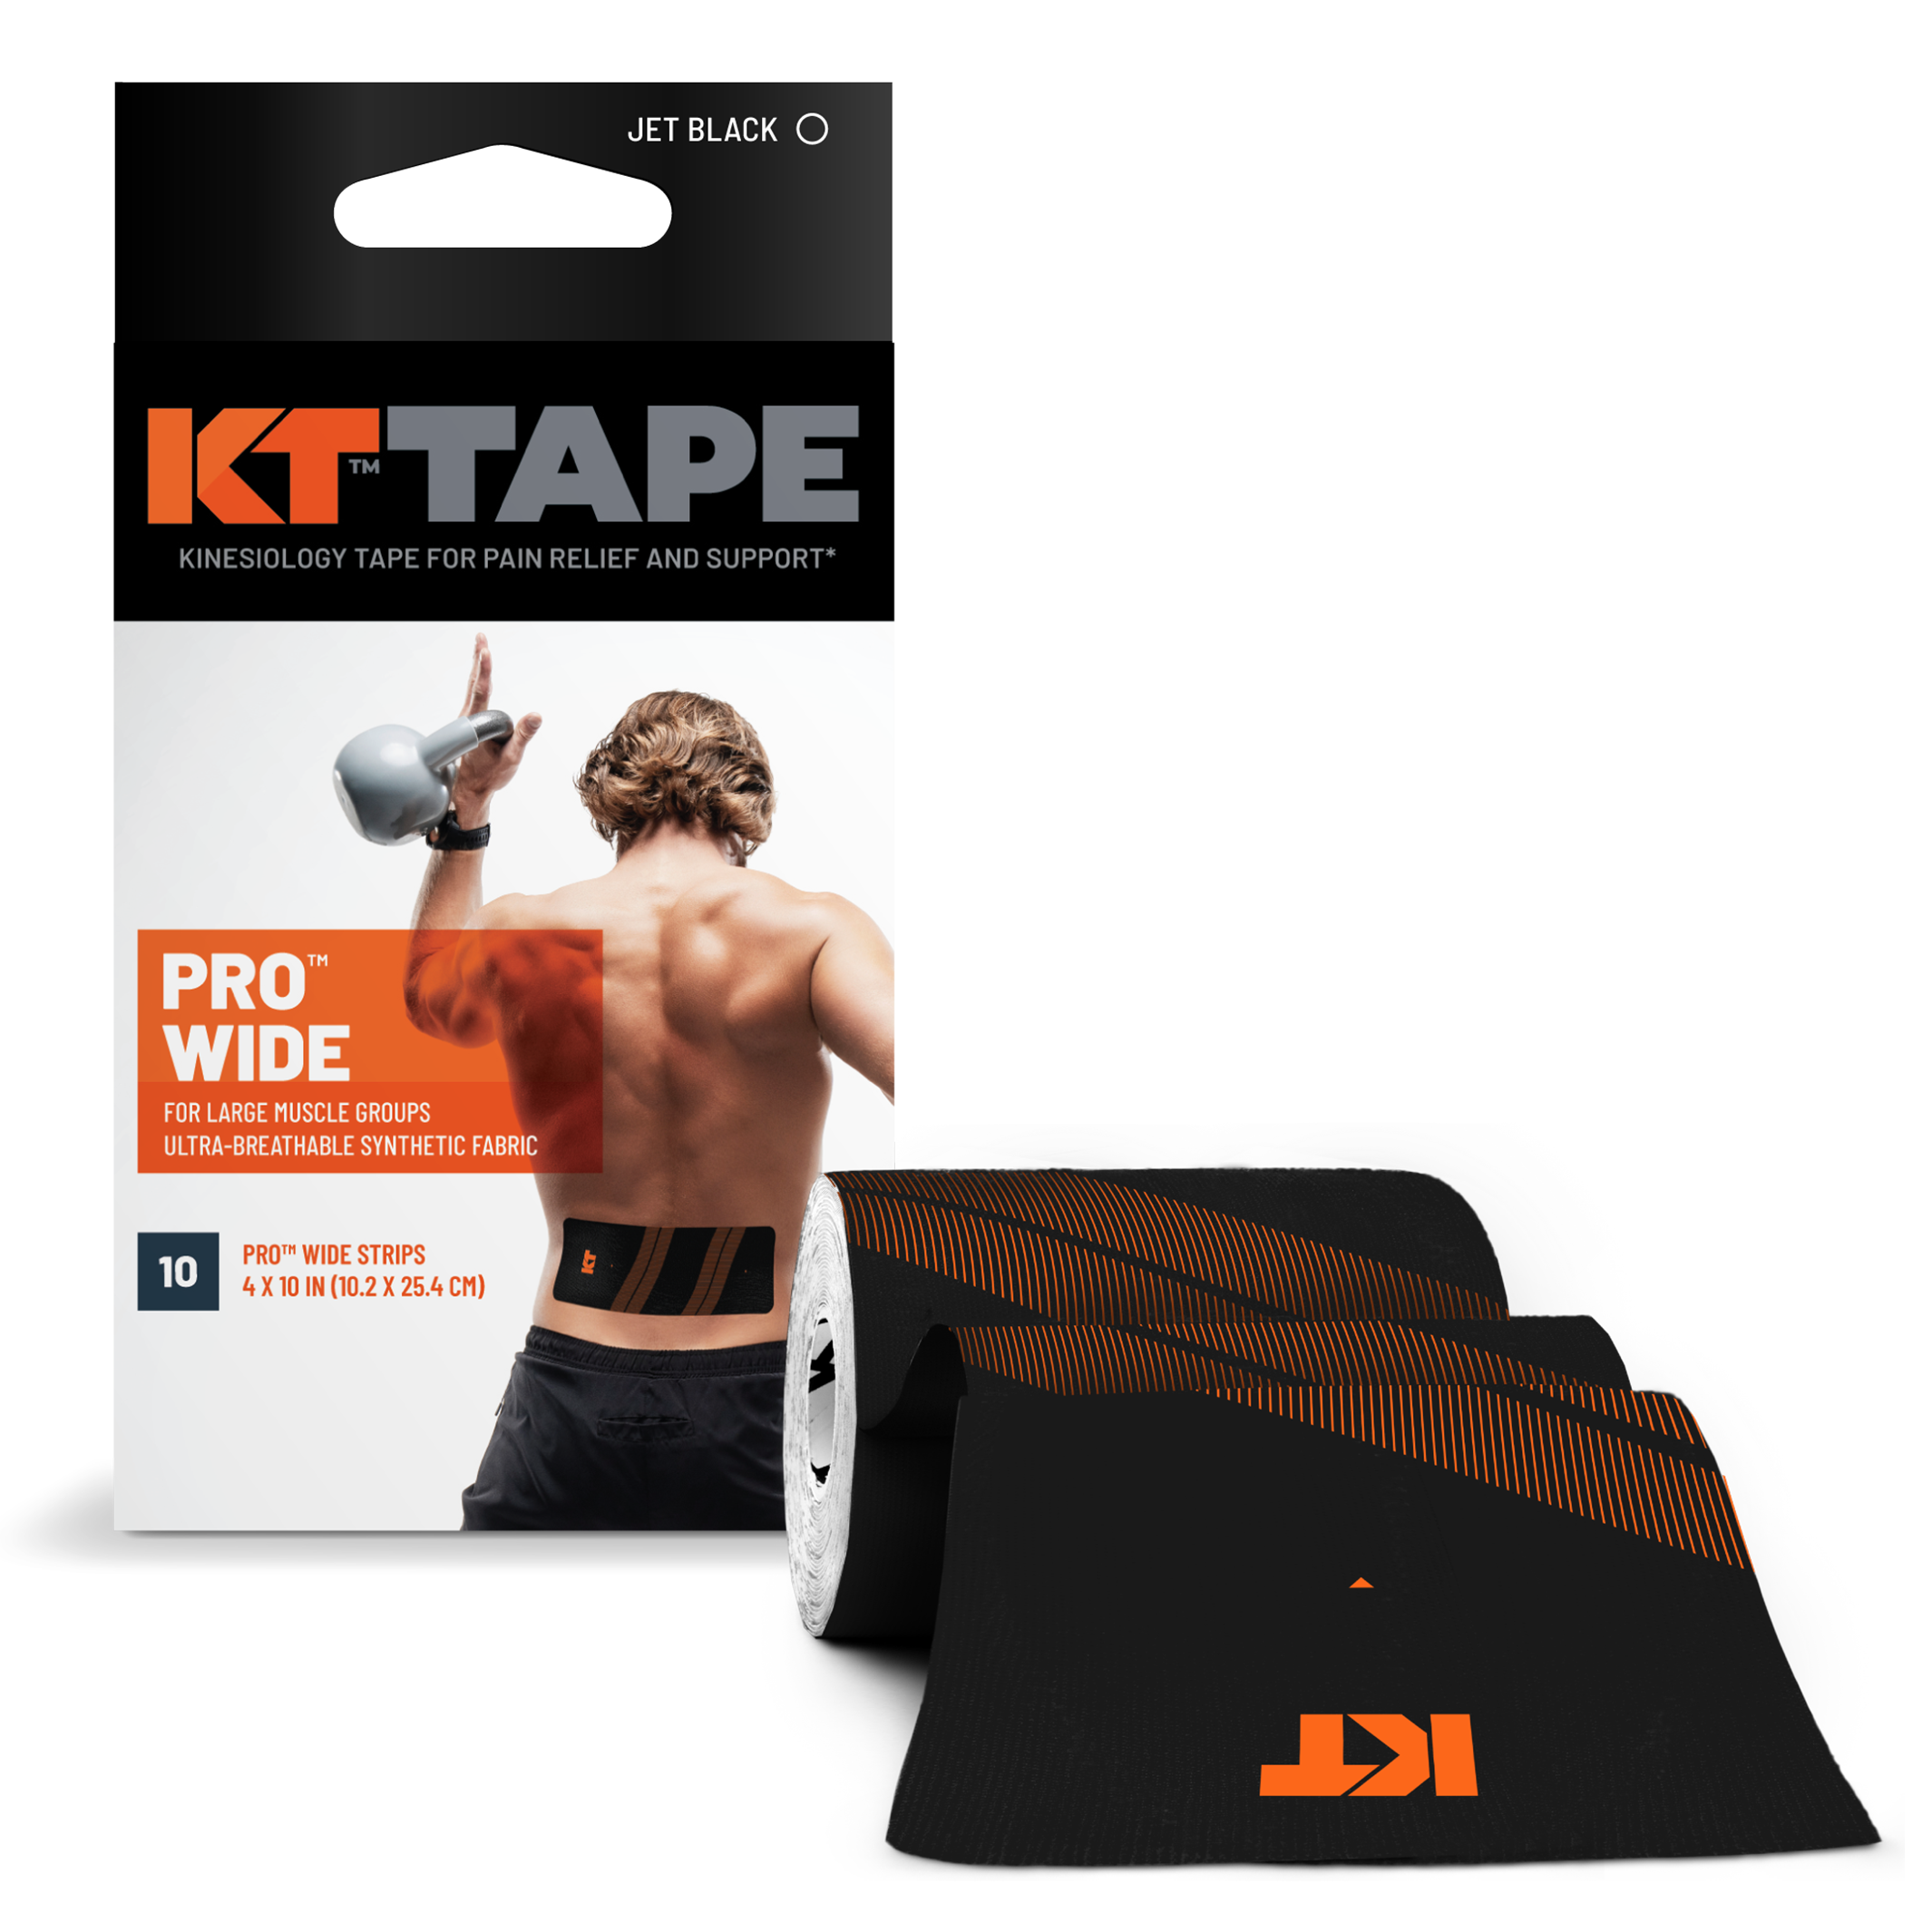 K-Tape for Me Precut Kinesiology Tape for Pain in the Wrist or Knee, 4 count